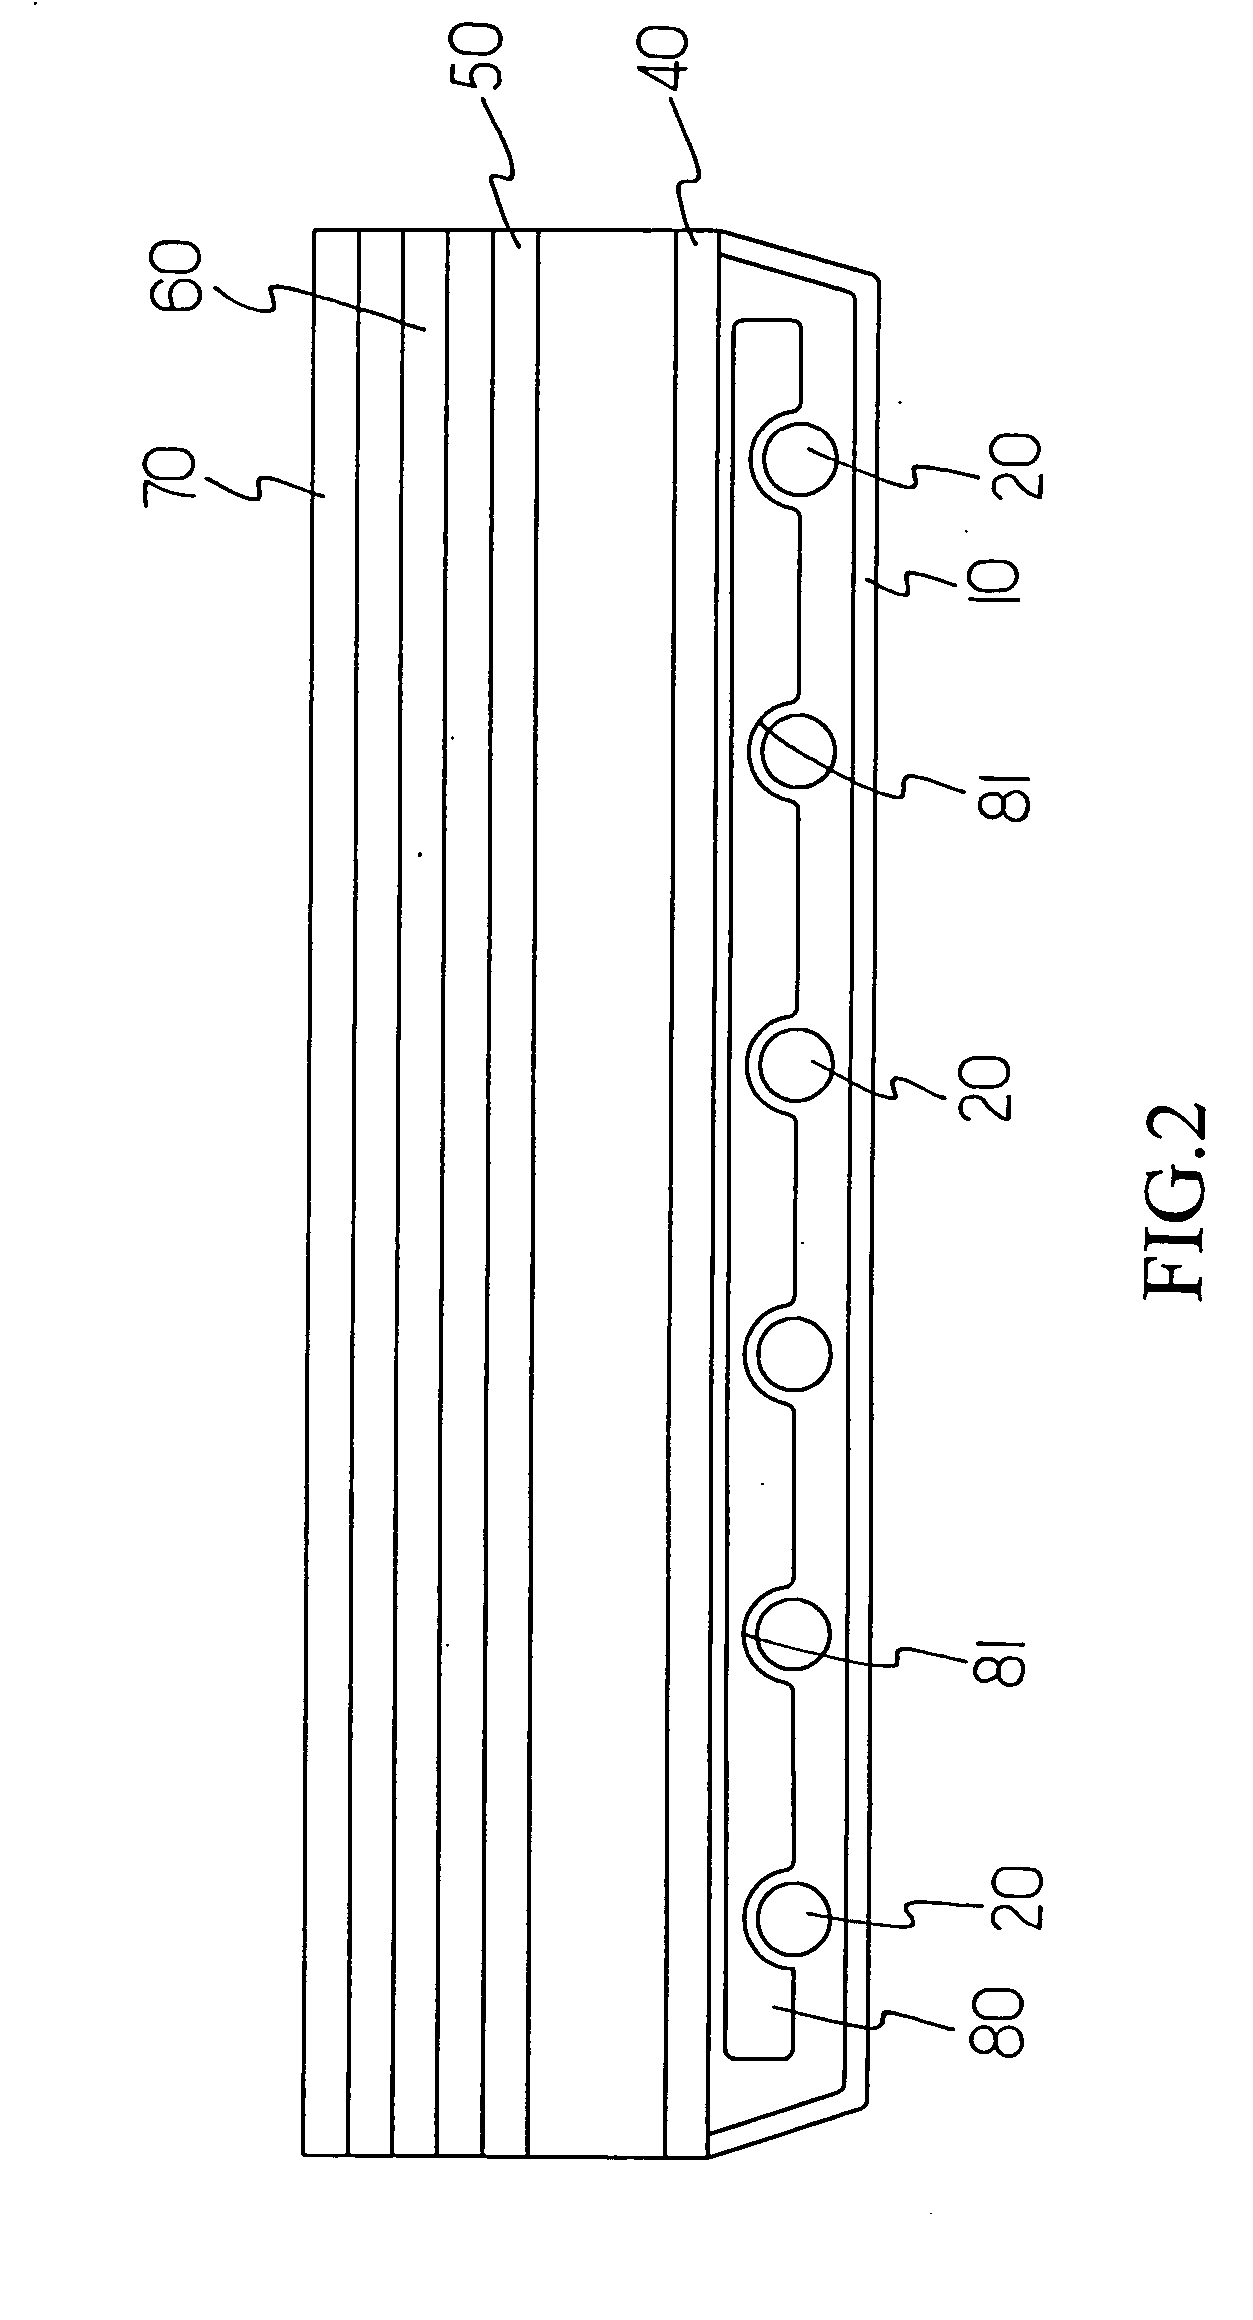 LCD optical waveguide device